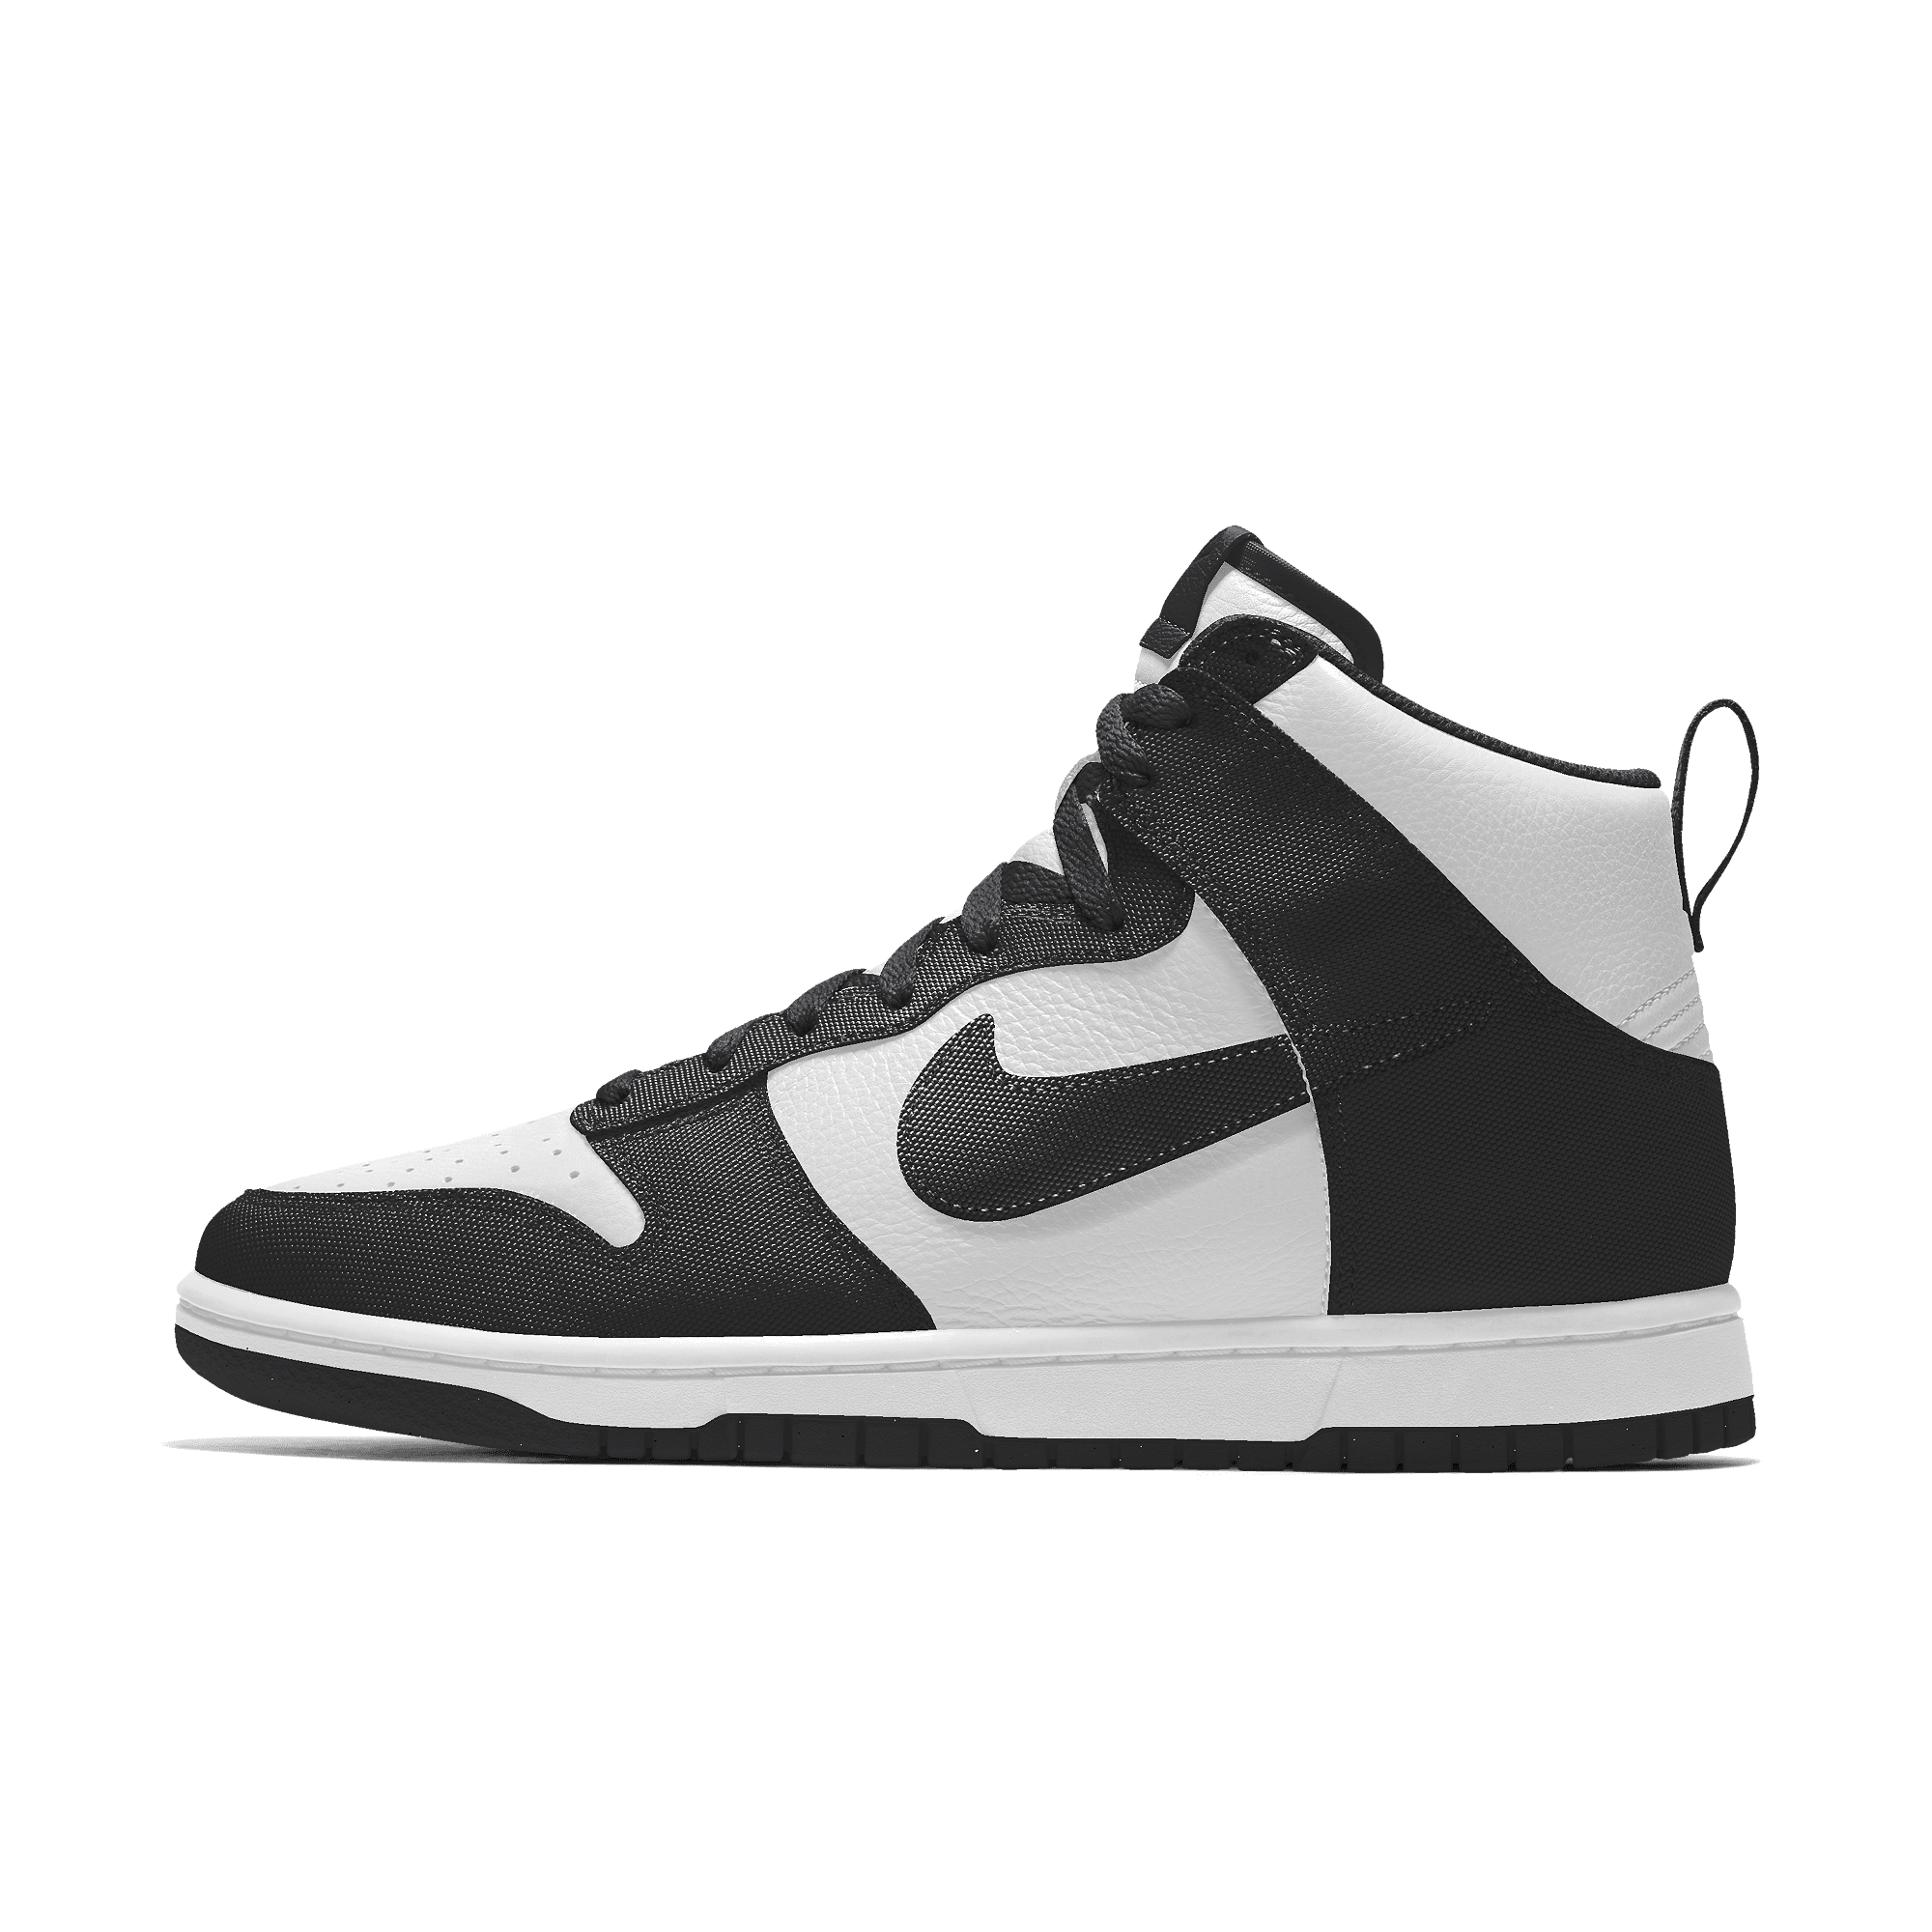 Scarpa personalizzabile Nike Dunk High By You – Donna - Nero